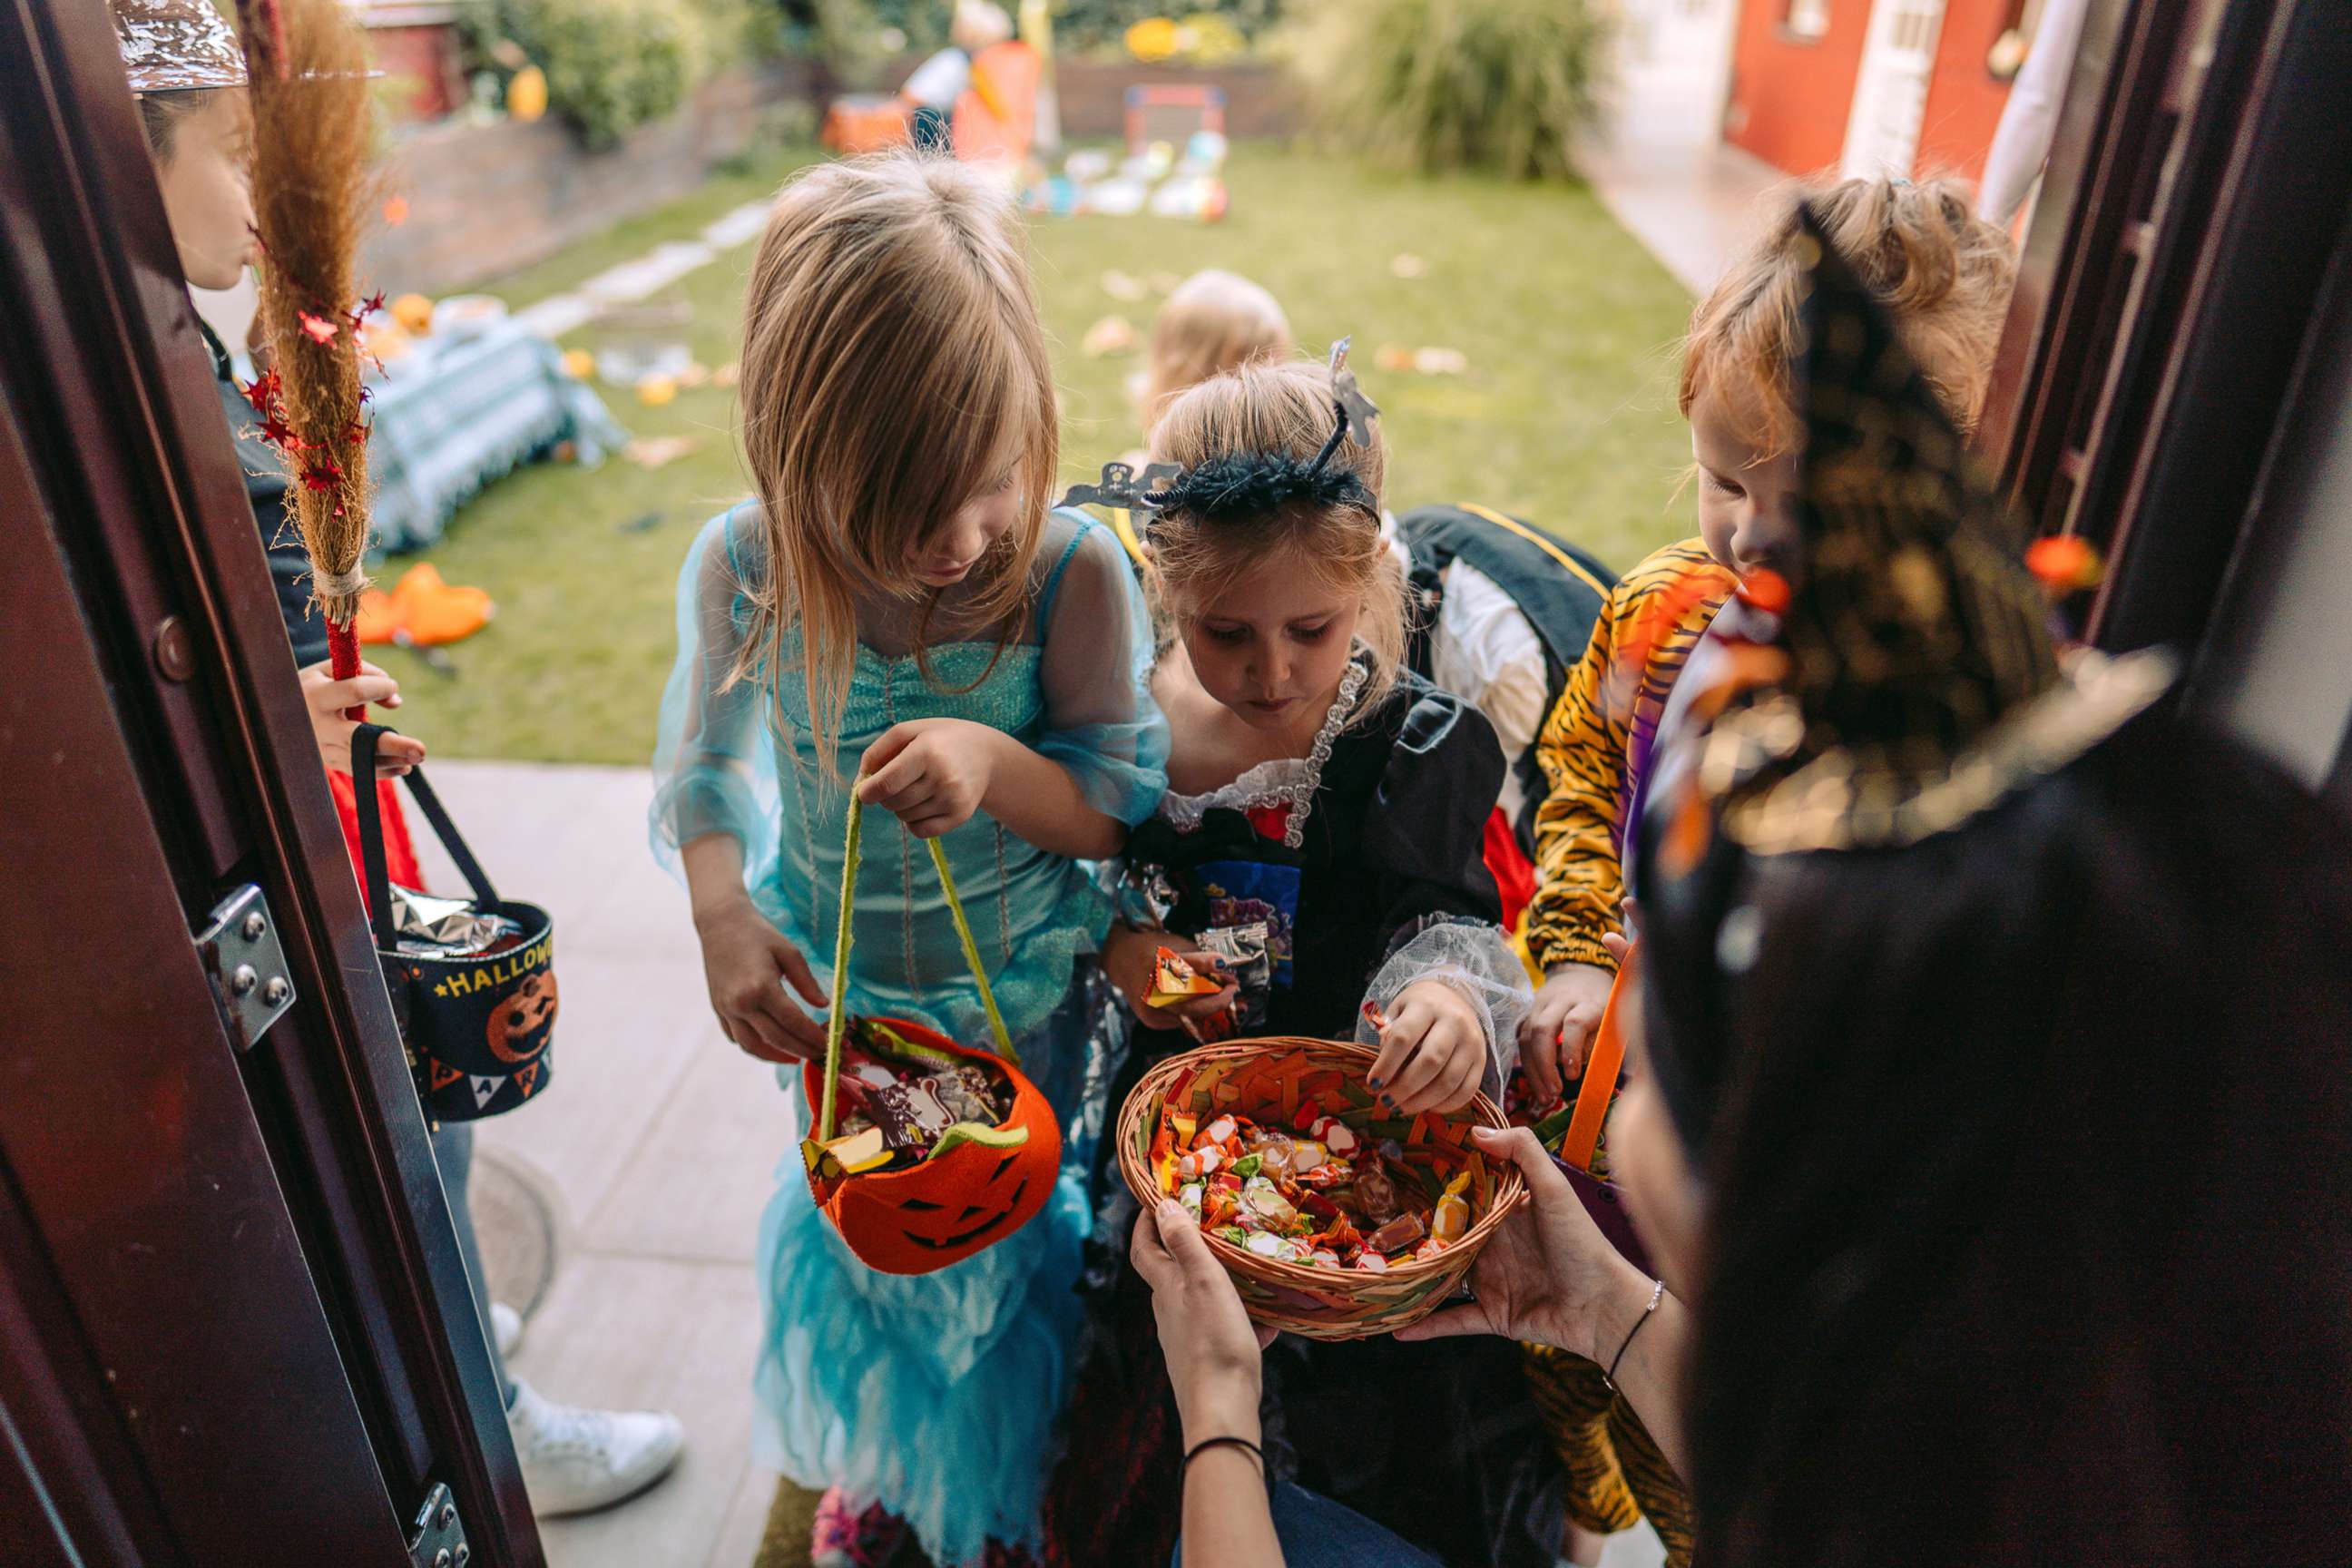 Cincinnati considering only trickortreating on weekends ABC News